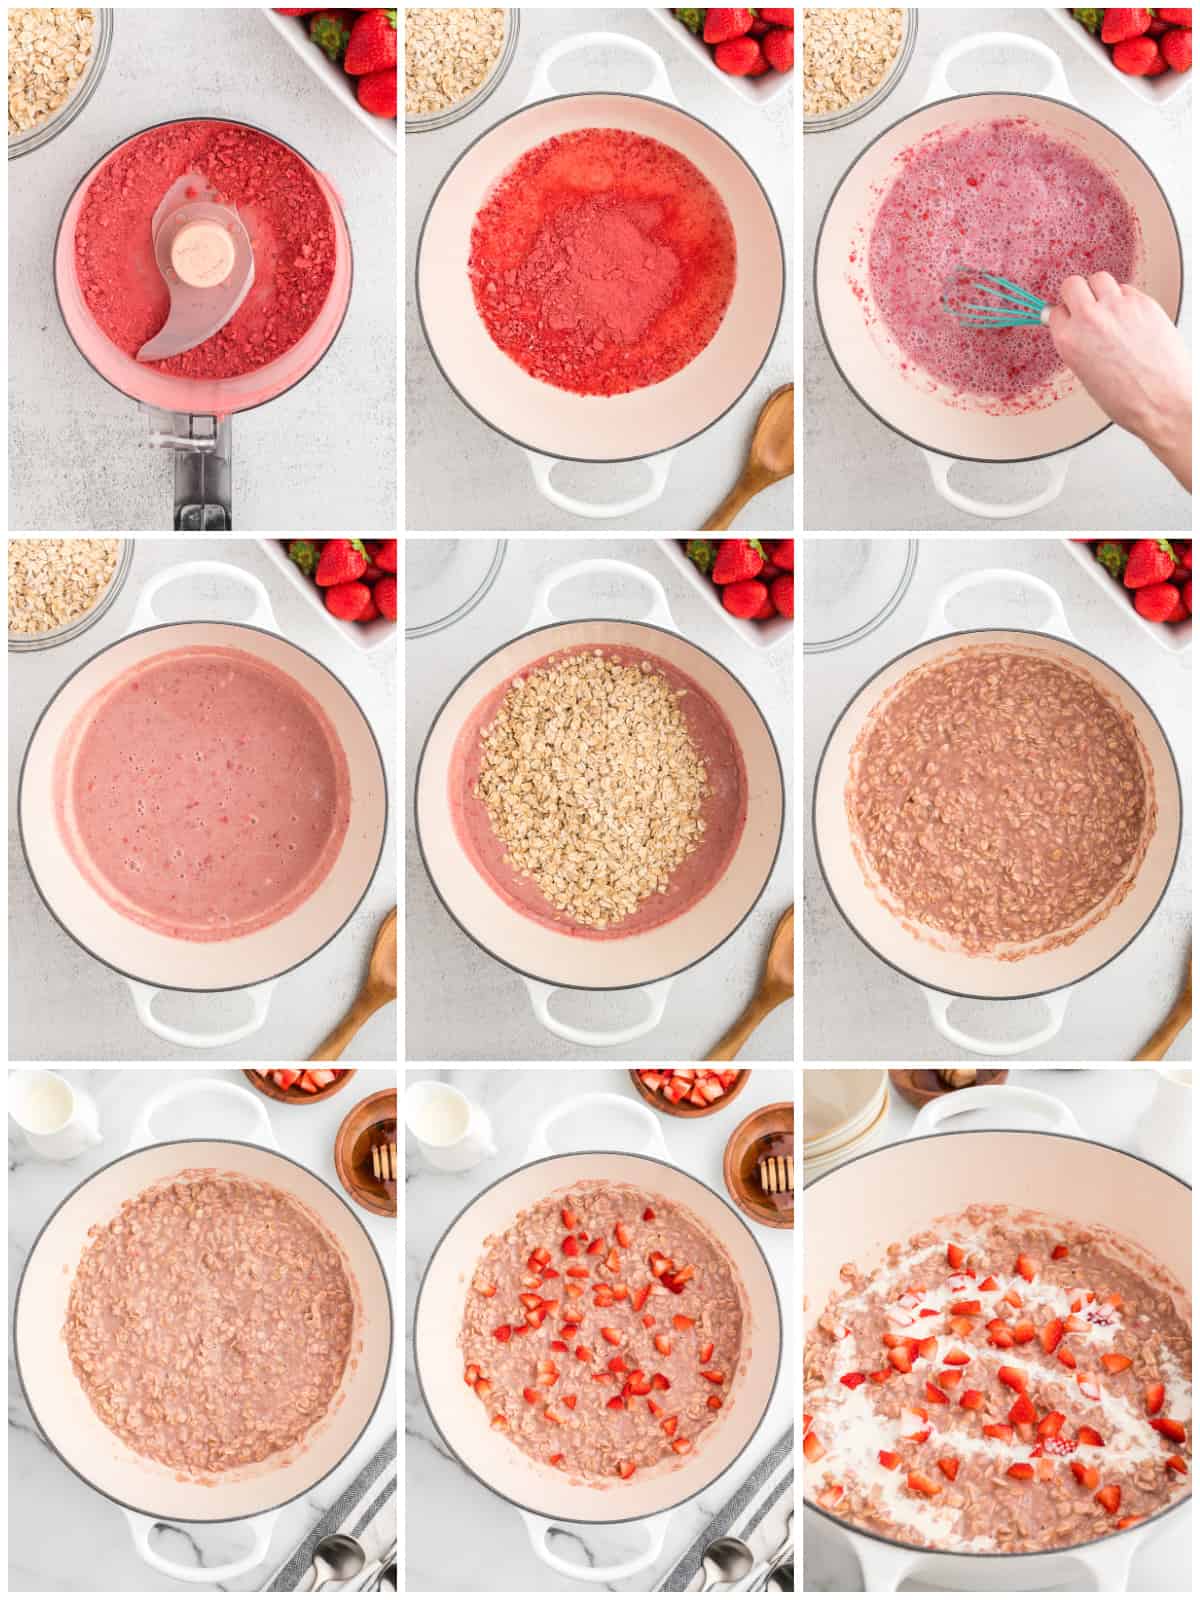 Step by step photos on how to make Strawberry Oatmeal.